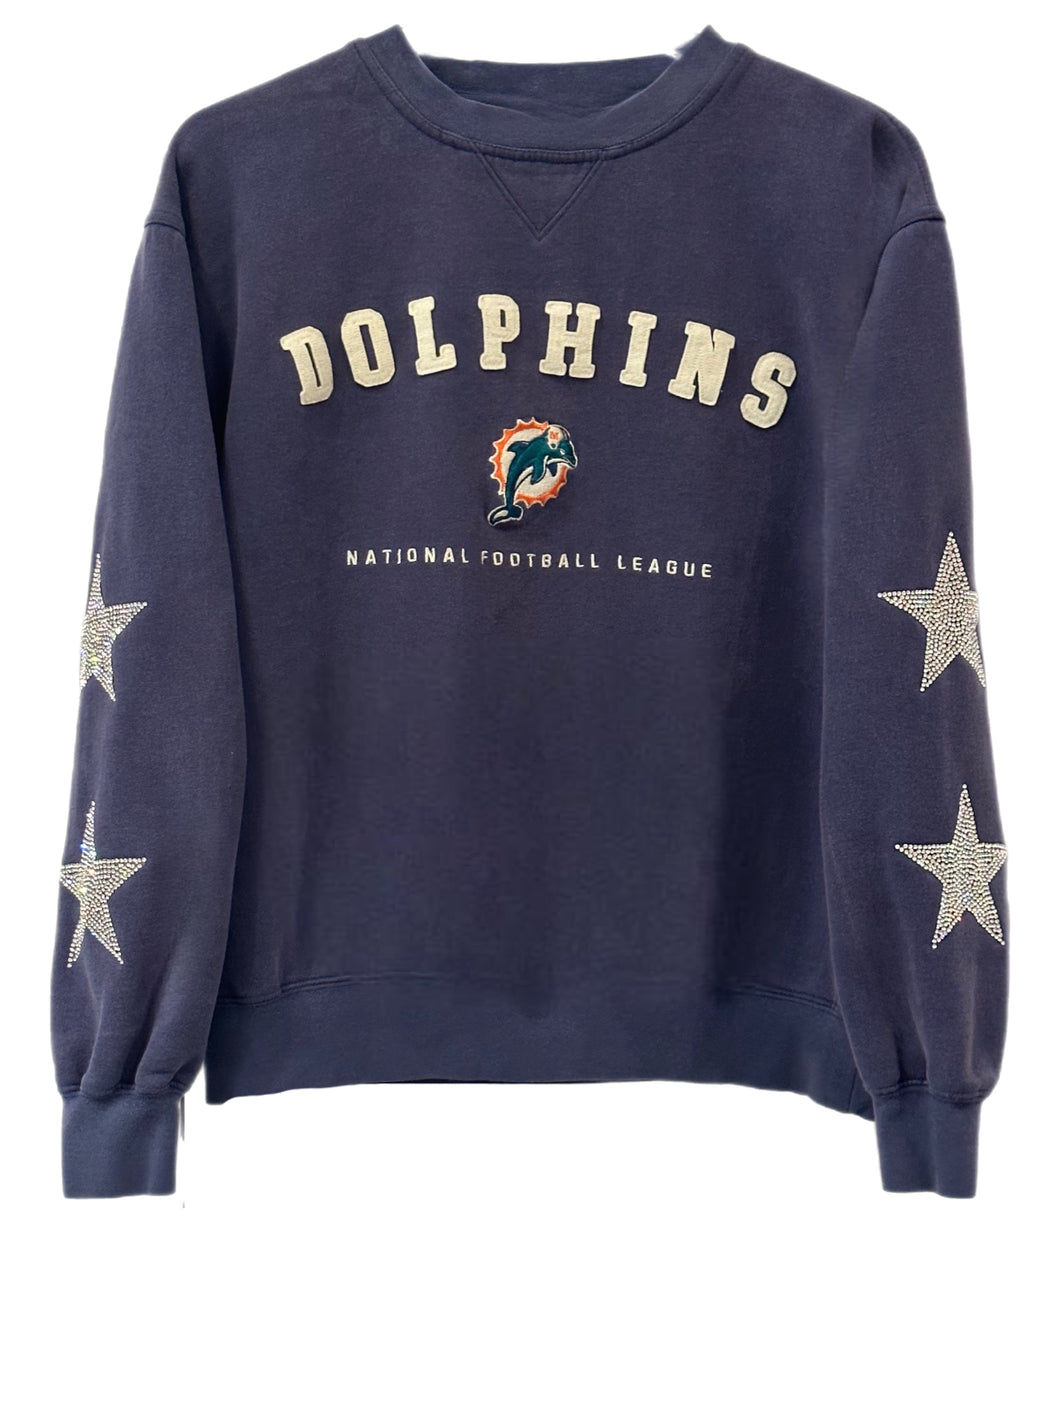 Miami Dolphins, NFL One of a KIND Vintage Sweatshirt with Crystal Star Design